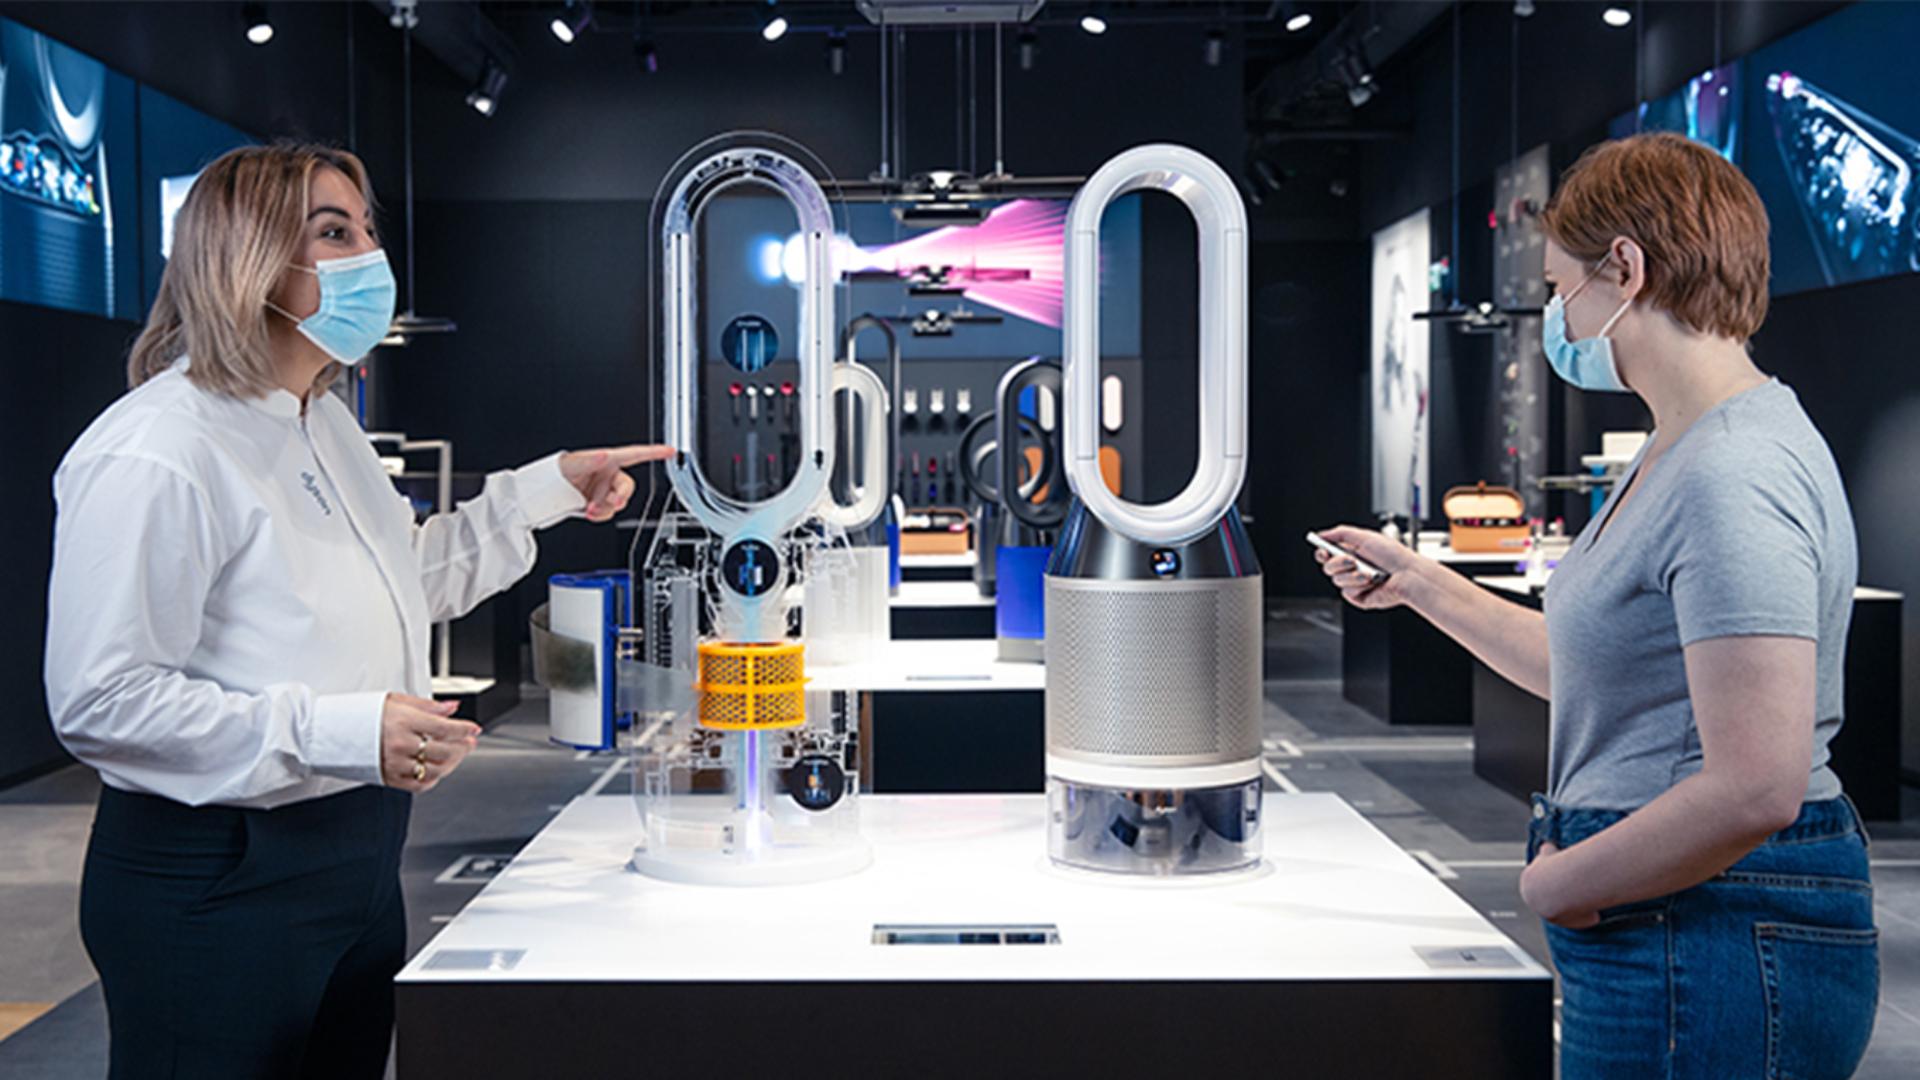 Dyson Expert talking to a customer in front of two Dyson purifiers